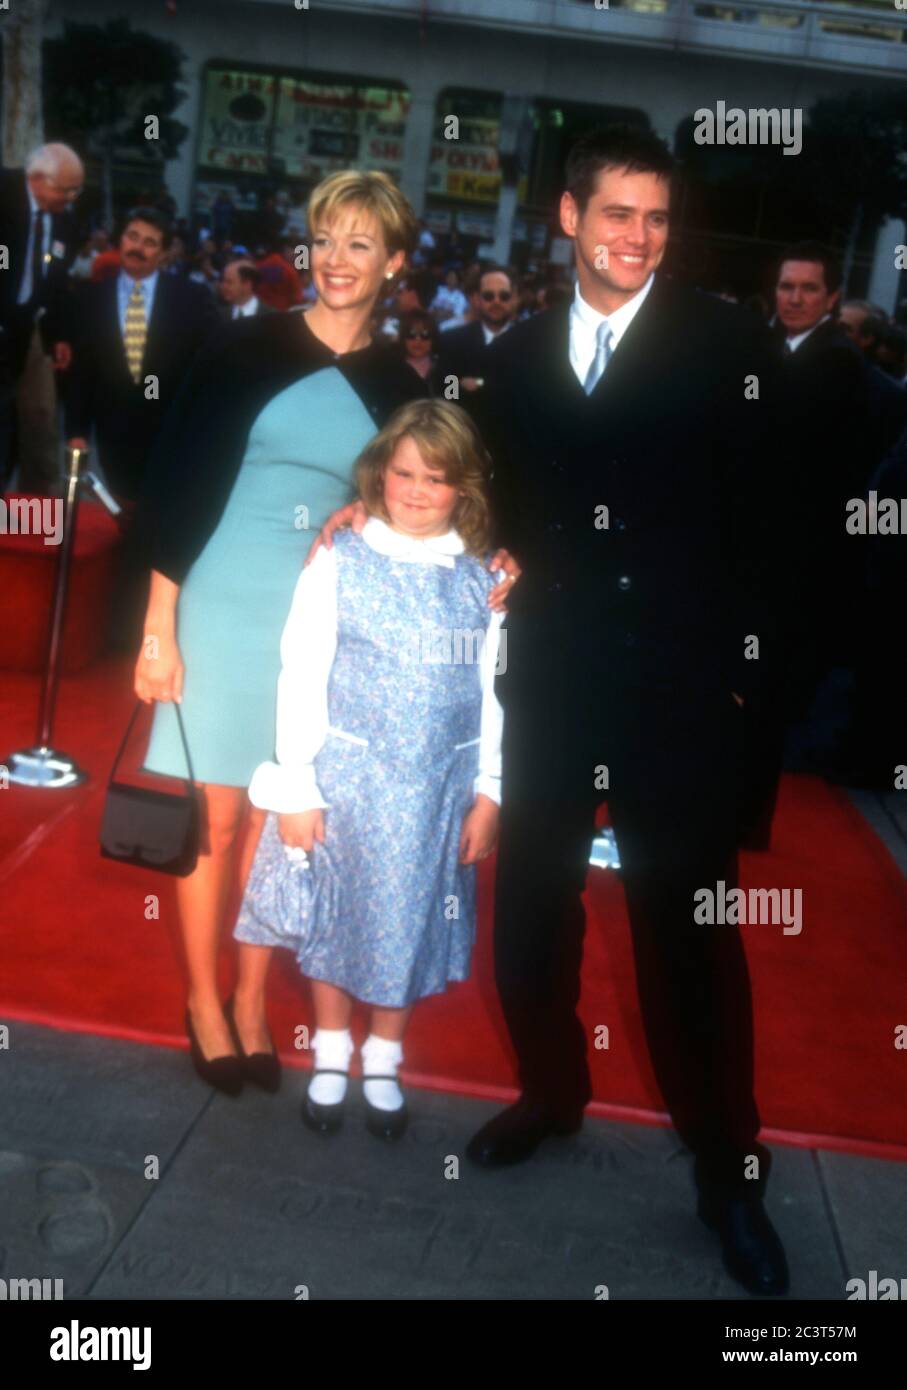 Hollywood, California, USA 2nd November 1995 Lauren Holly, Jane Carrey and Actor Jim Carrey attend Jim Carrey's hand and footprint in cement ceremony on November 2, 1995 at Mann's Chinese Theatre in Hollywood, California, USA. Photo by Barry King/Alamy Stock Photo Stock Photo